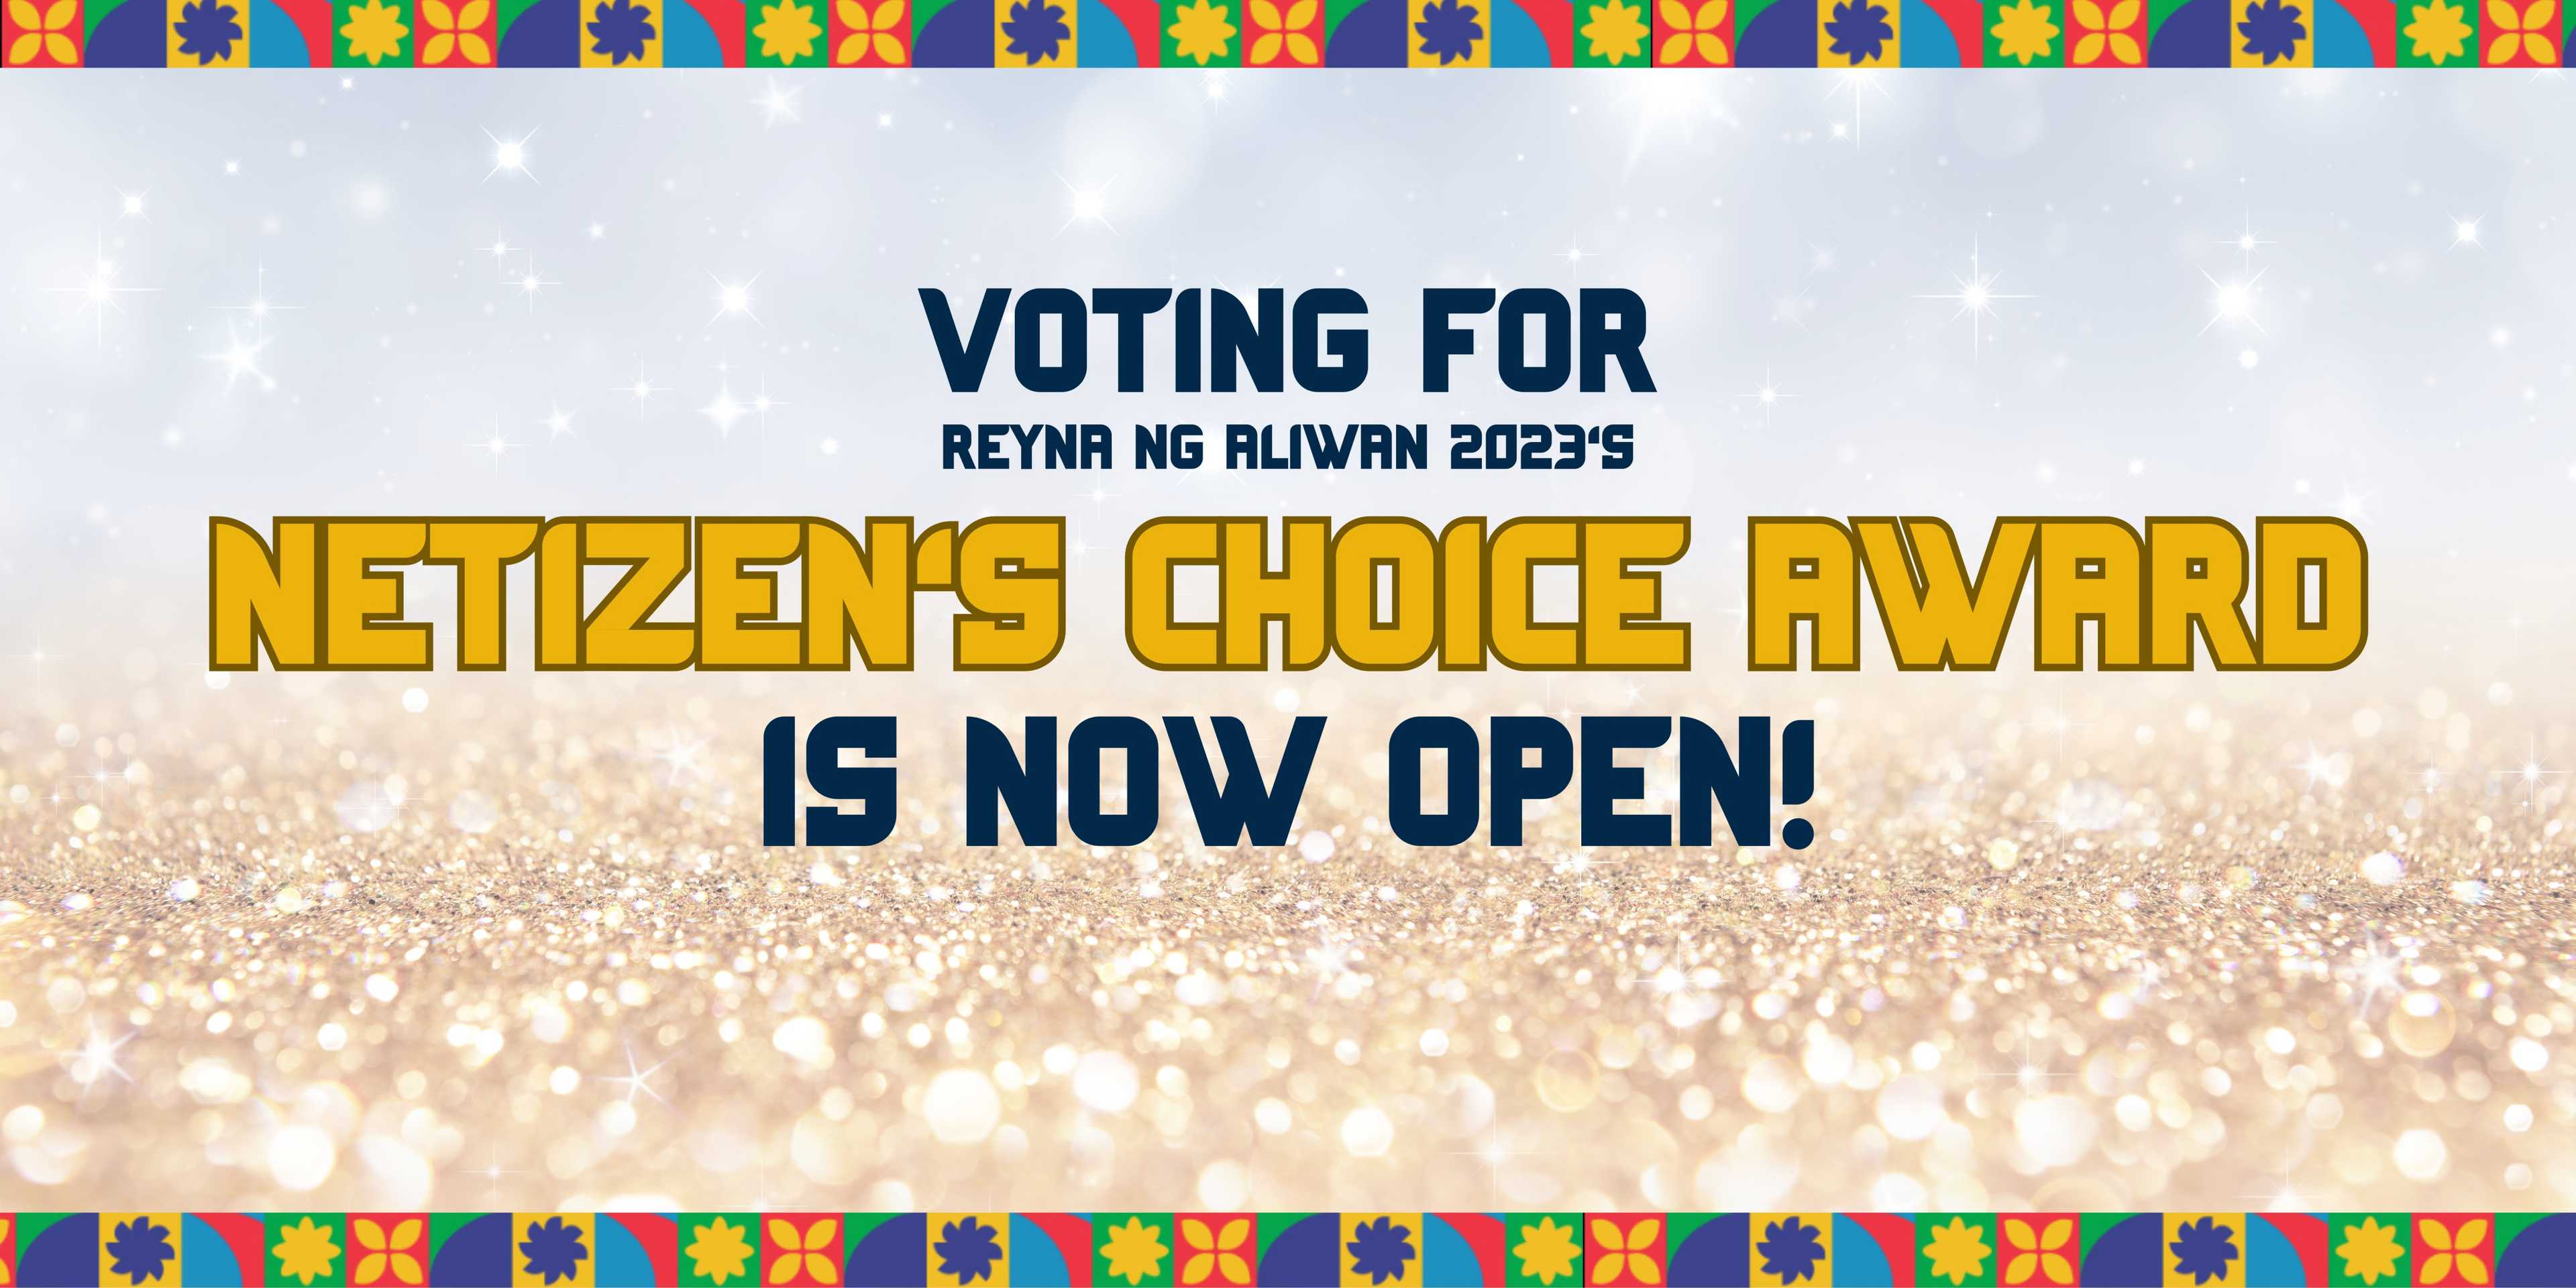 Voting for Reyna ng Aliwan 2023 ‘Netizens‘ Choice Award’ is now open!